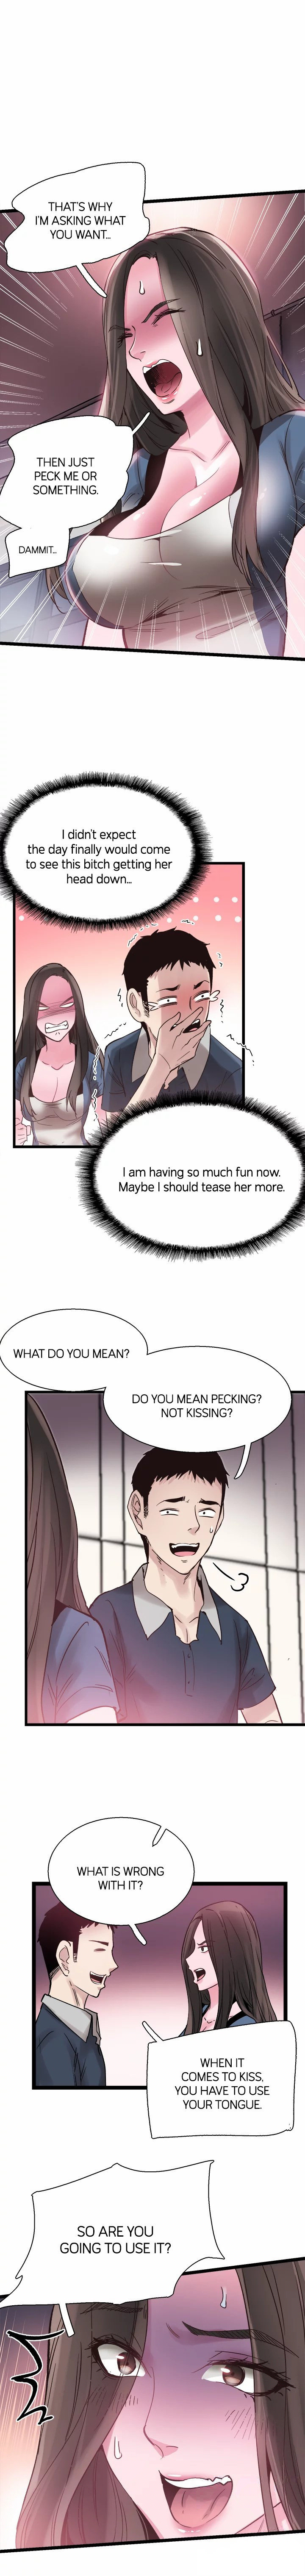 Campus Live - Chapter 8 Page 9